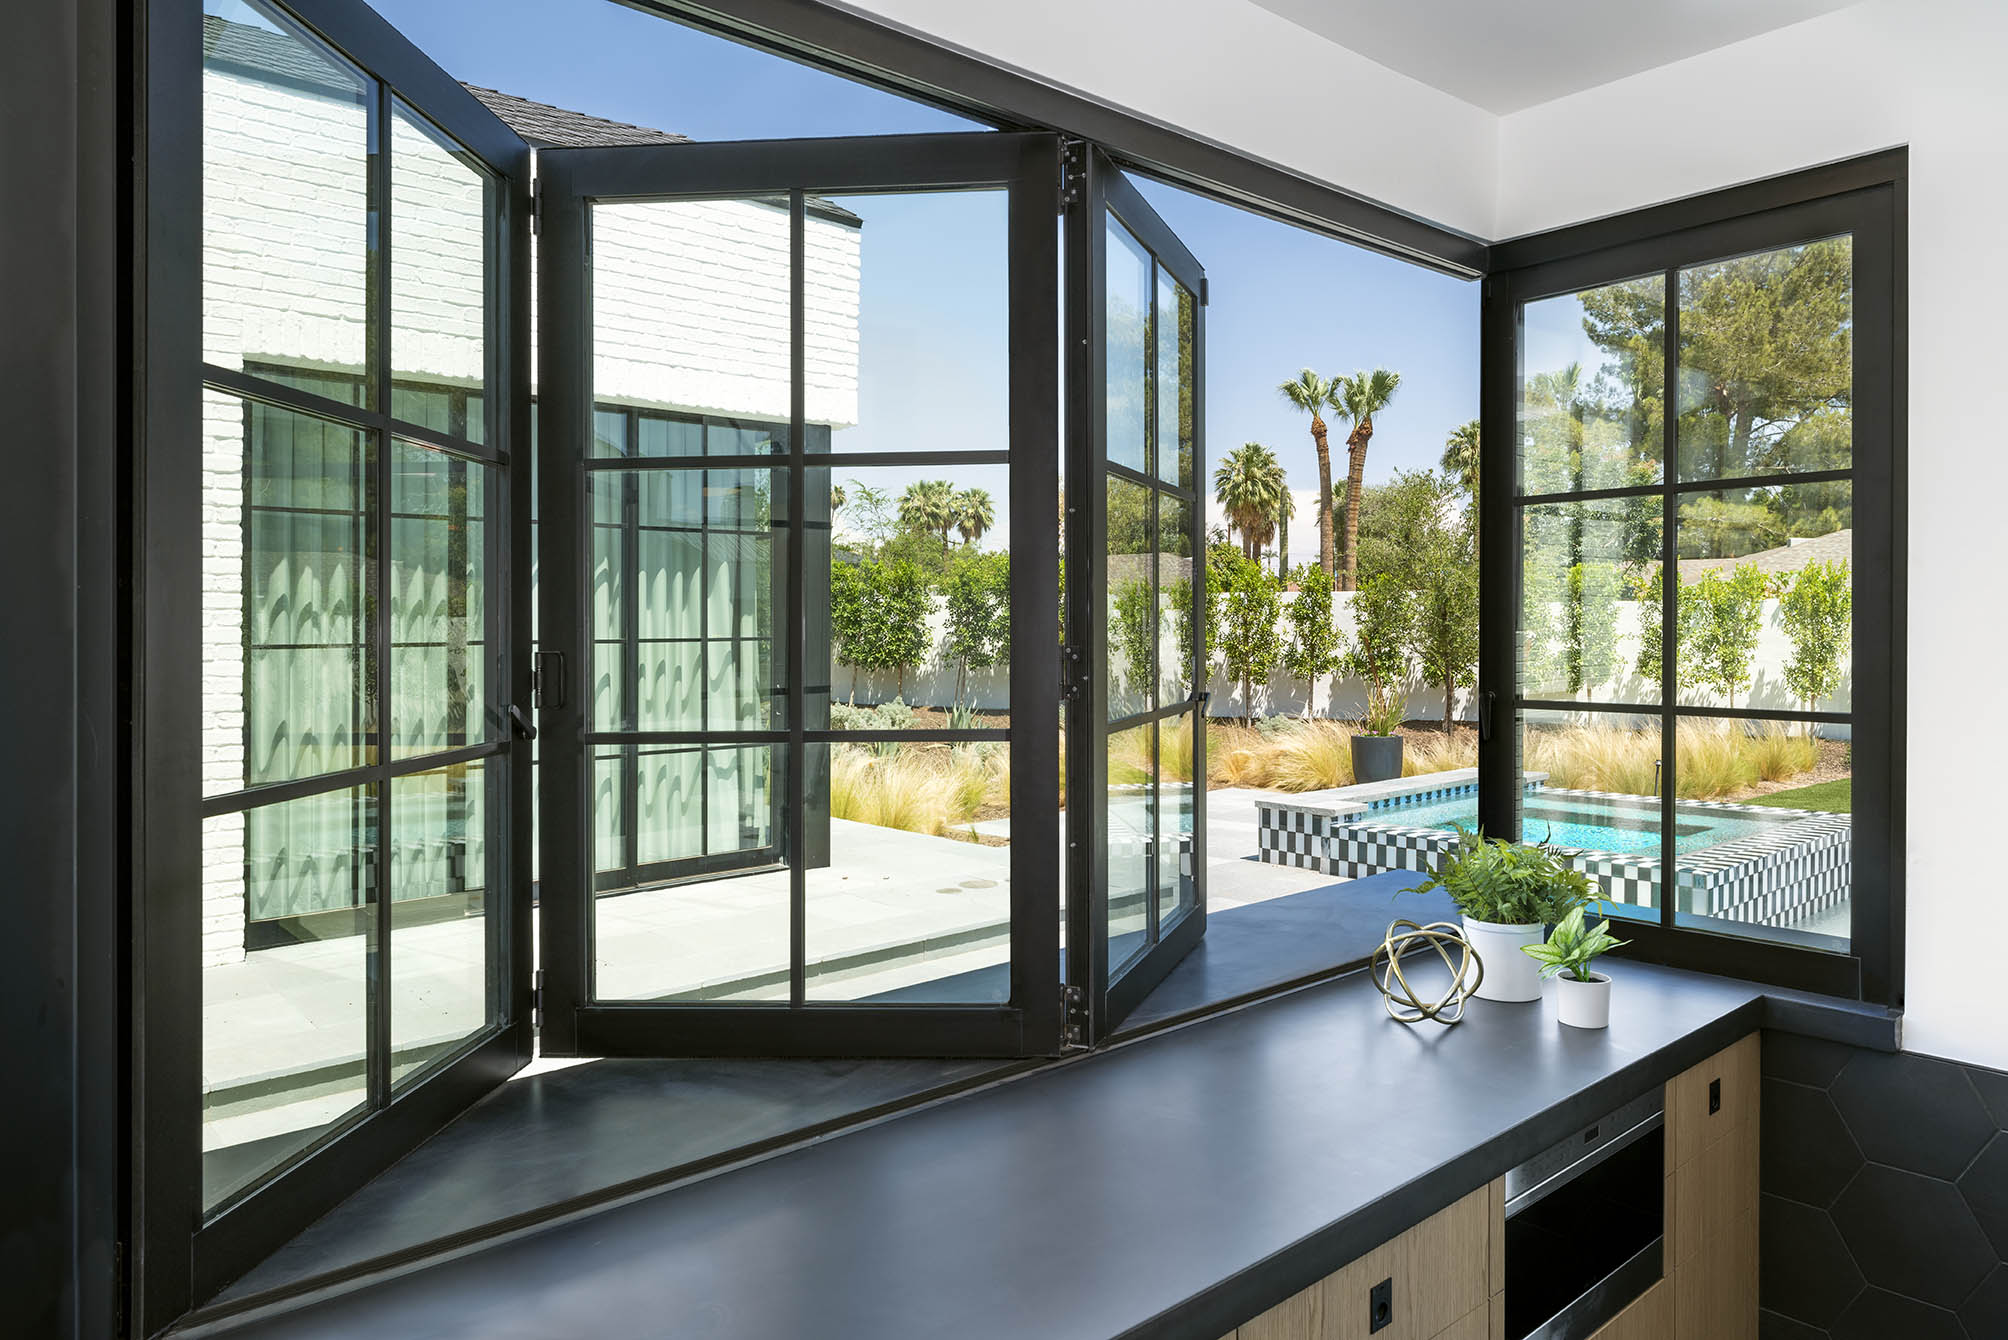 The partly open bi-fold window connects the outdoor pool area to the kitchen.